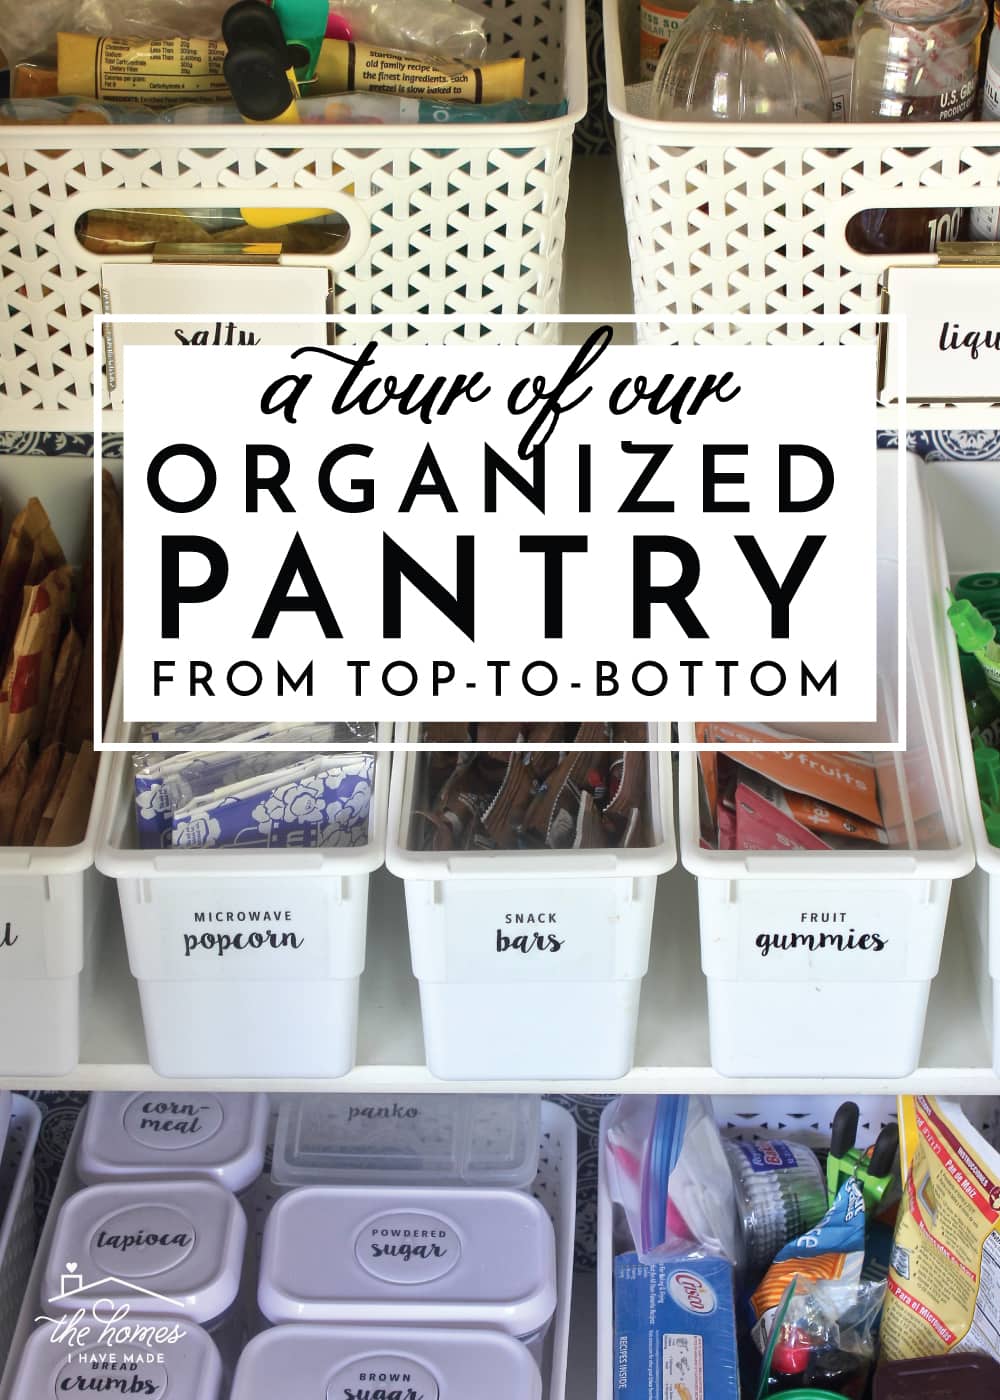 https://thehomesihavemade.com/wp-content/uploads/2018/09/A-Tour-of-Our-Organized-Pantry-From-Top-to-Bottom_1.jpg